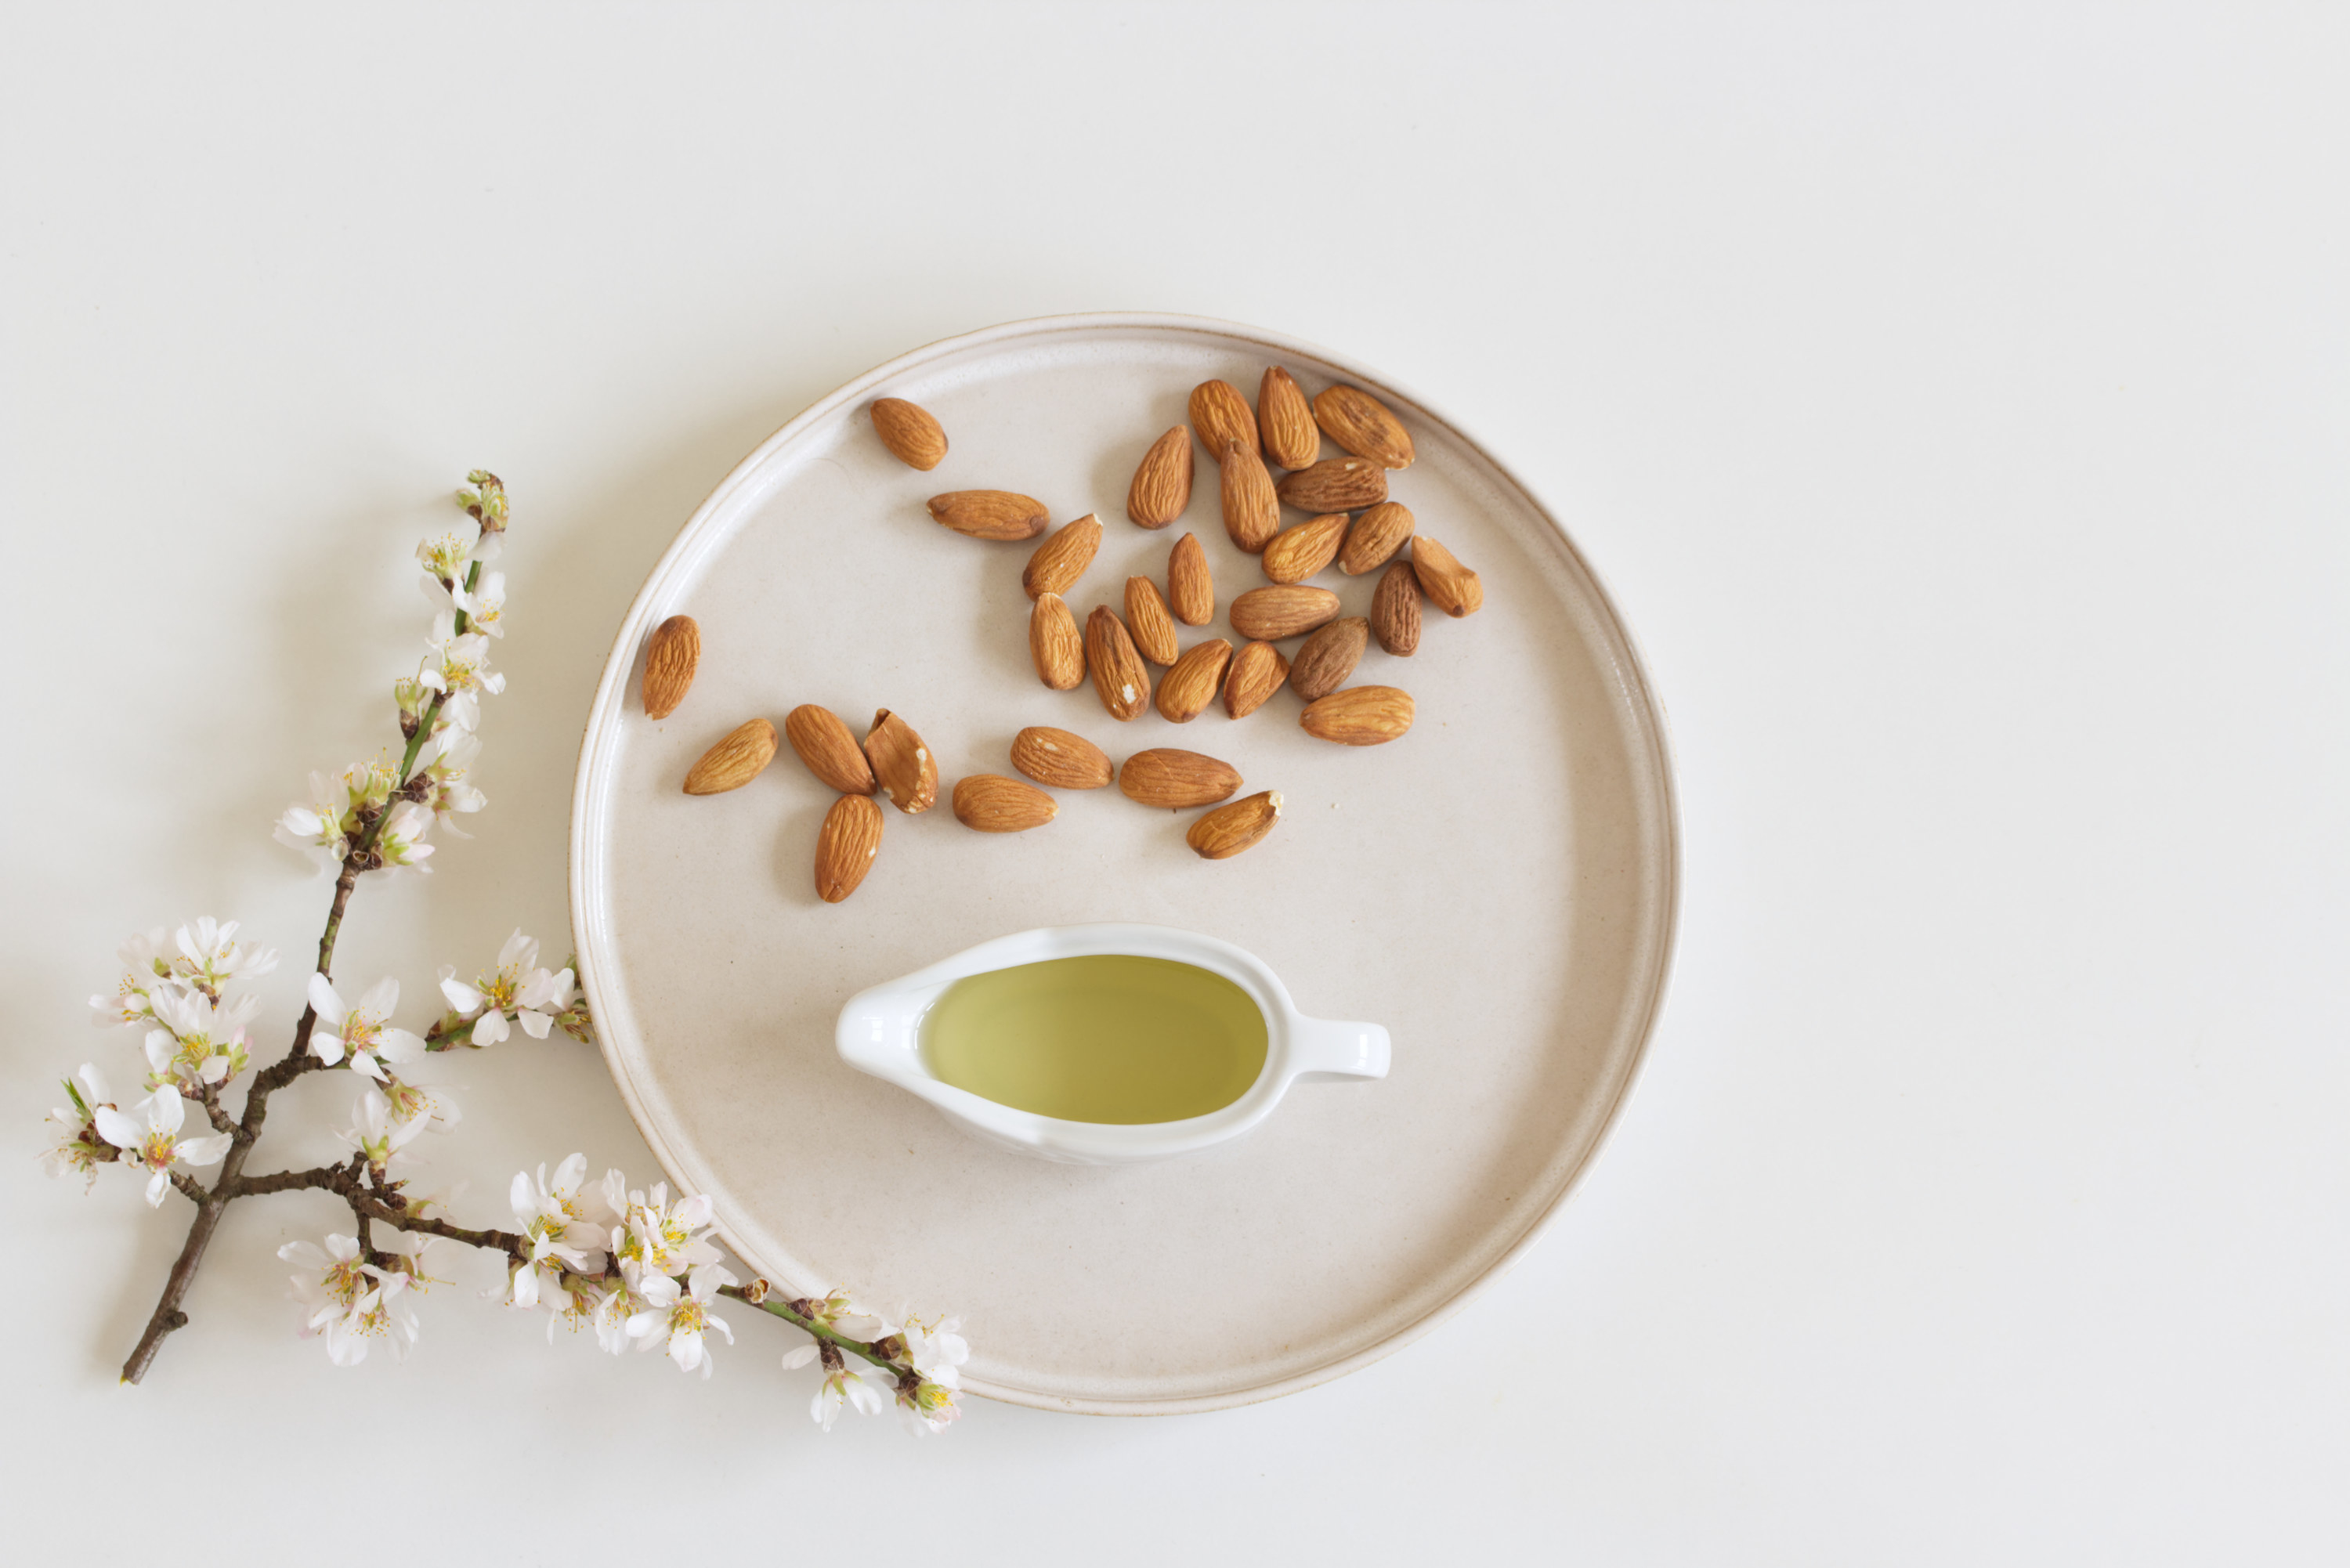 An overview of almonds and oil with a small tree branch